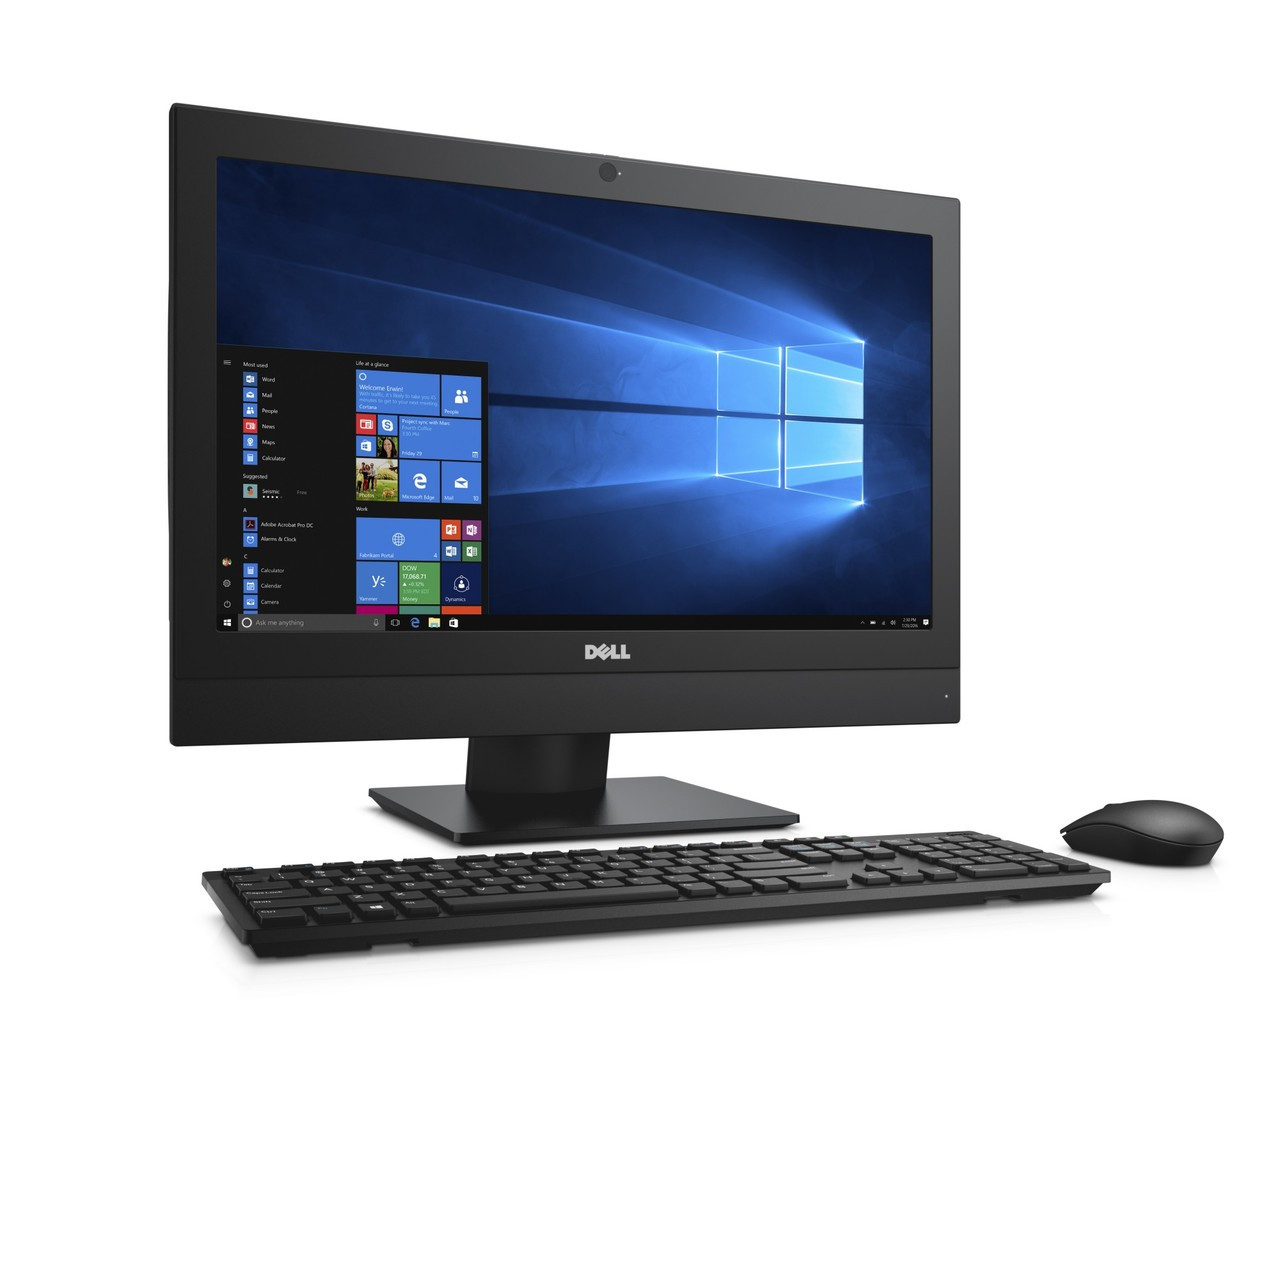 DELL OptiPlex 5250 3.4GHz i5-7500 21.5" 1920 x 1080pixels Touchscreen Black All-in-One PC